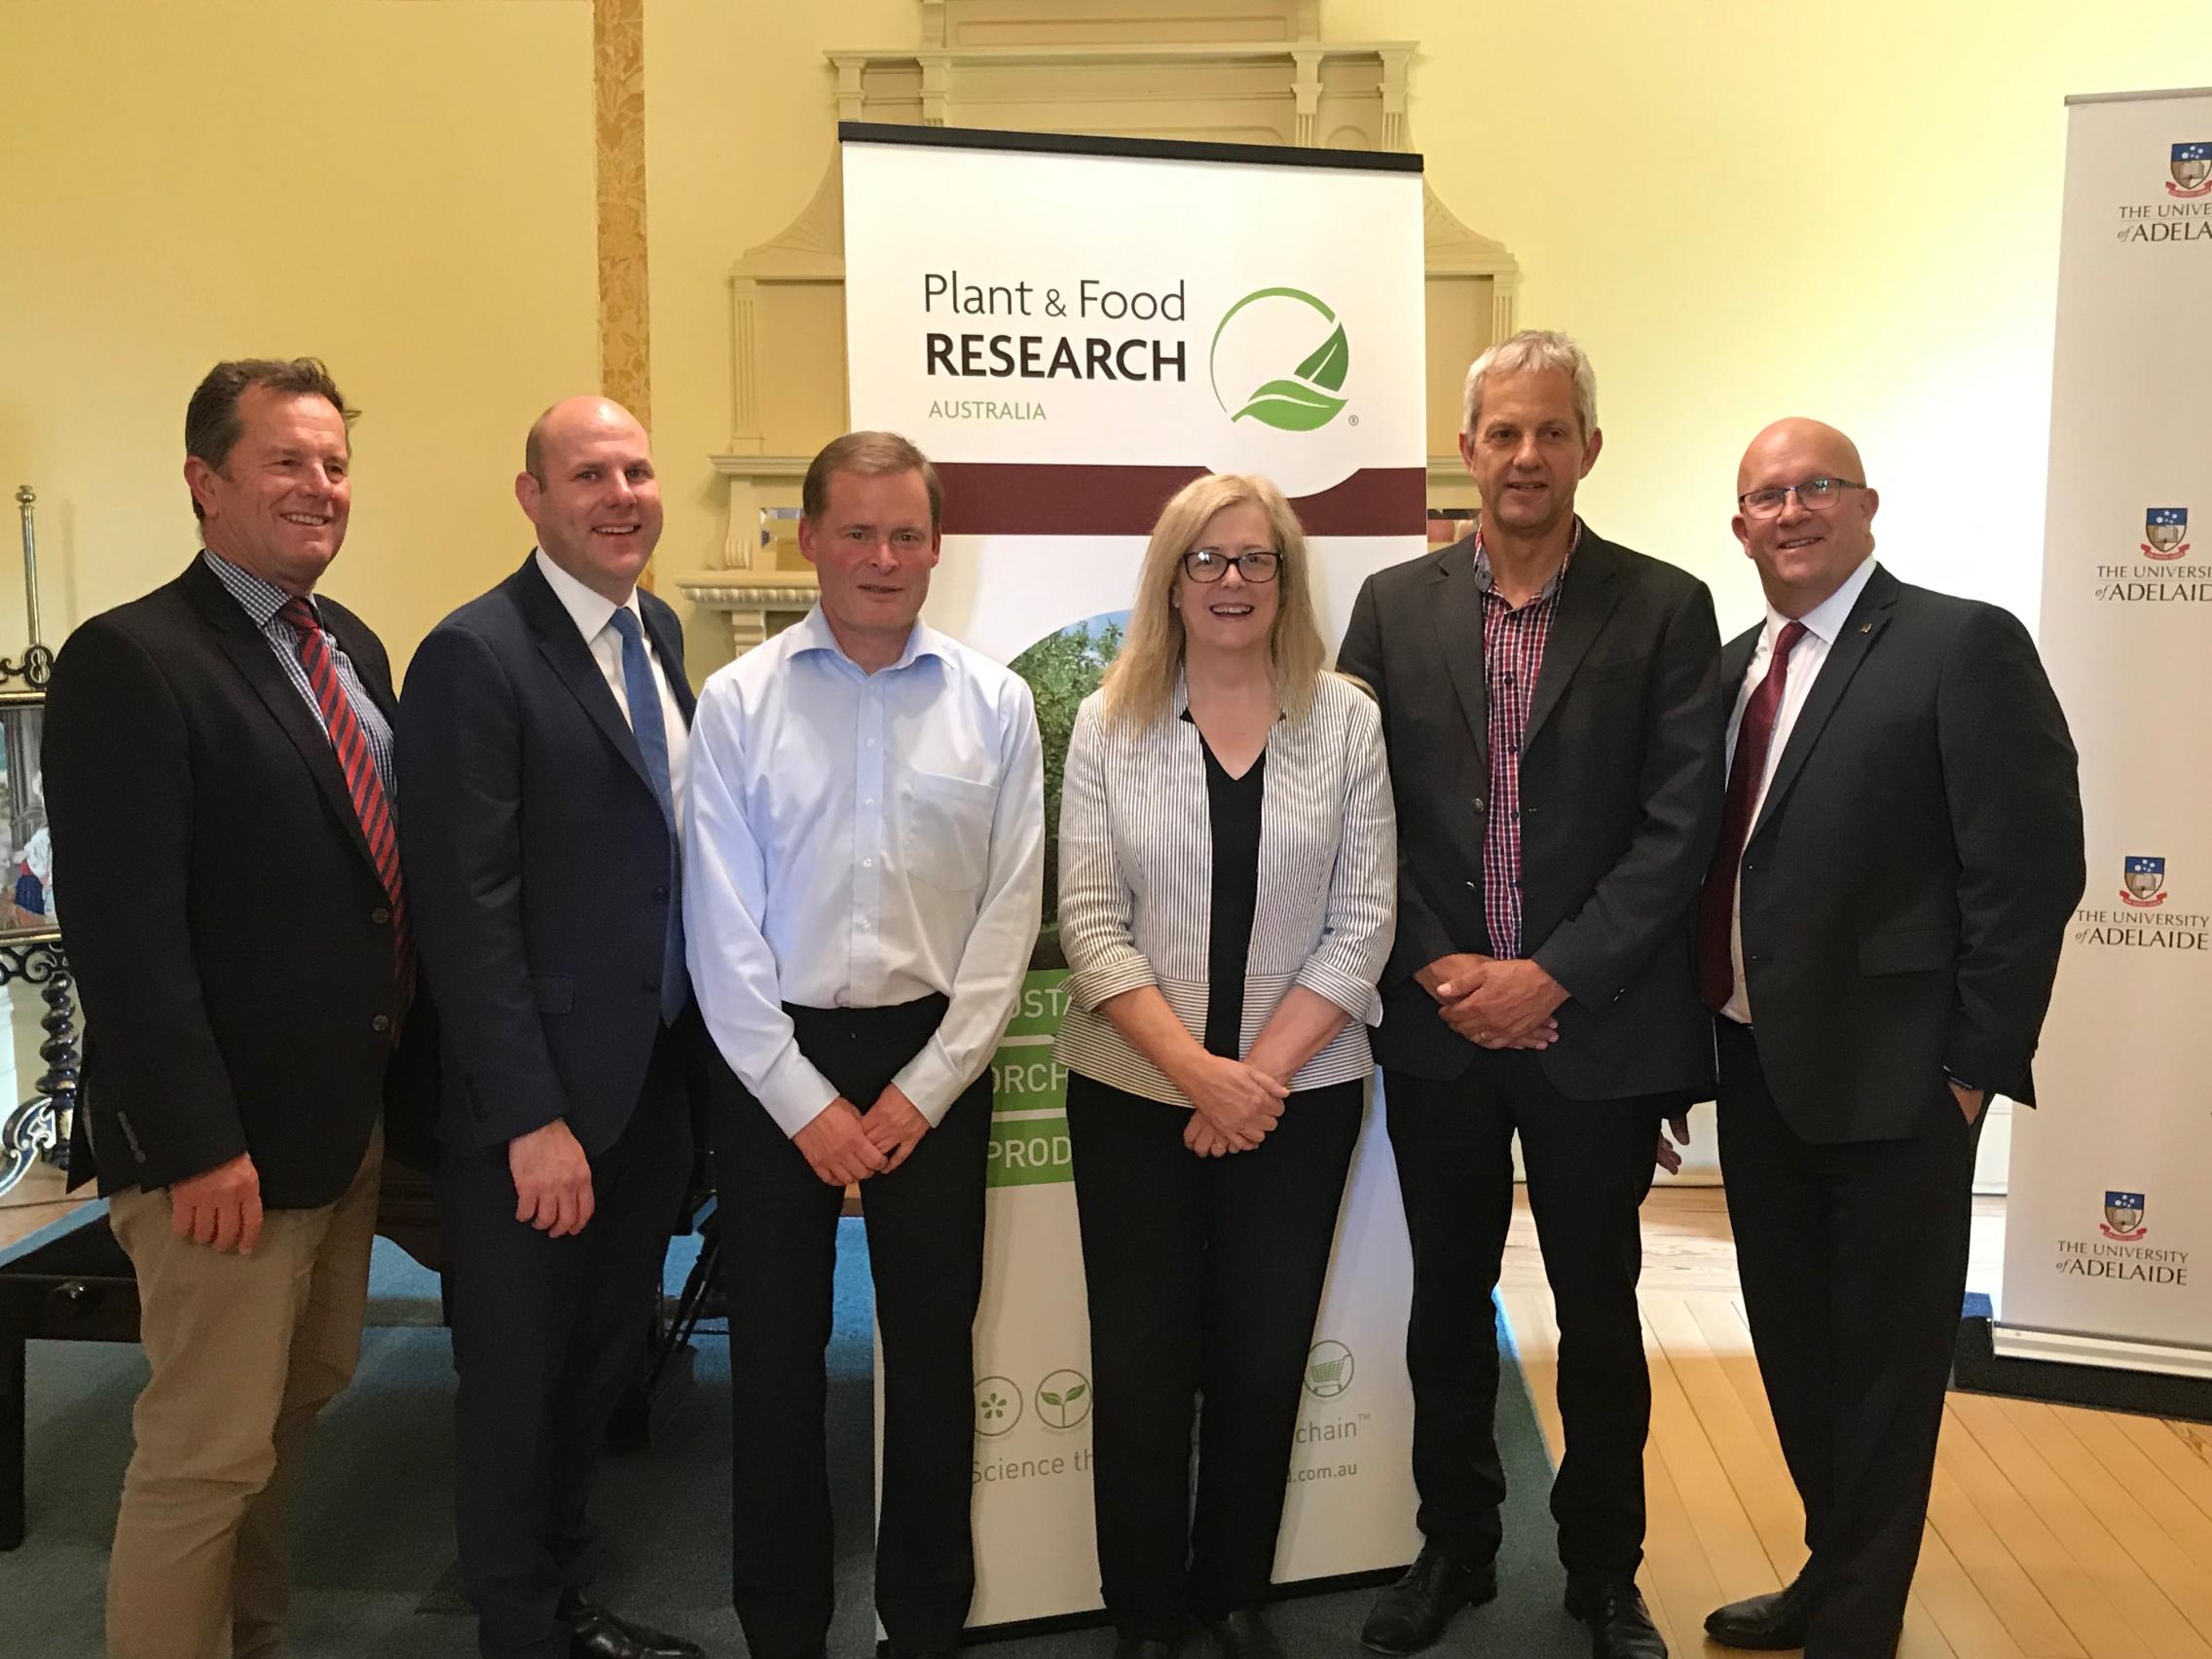 From left to right: Hon Tim Whetstone MP, SA Minister for Primary Industries and Regional Development; Mr Sam Duluk MP, Member for Waite; Professor Peter Rathjen, Vice-Chancellor and President, The University of Adelaide; Professor Caroline McMillen, SA Chief Scientist; Dr Gavin Ross, Group General Manager, Marketing and Innovation, Plant & Food Research; Hon David Ridgway MLC, SA Minister for Trade, Tourism and Investment.